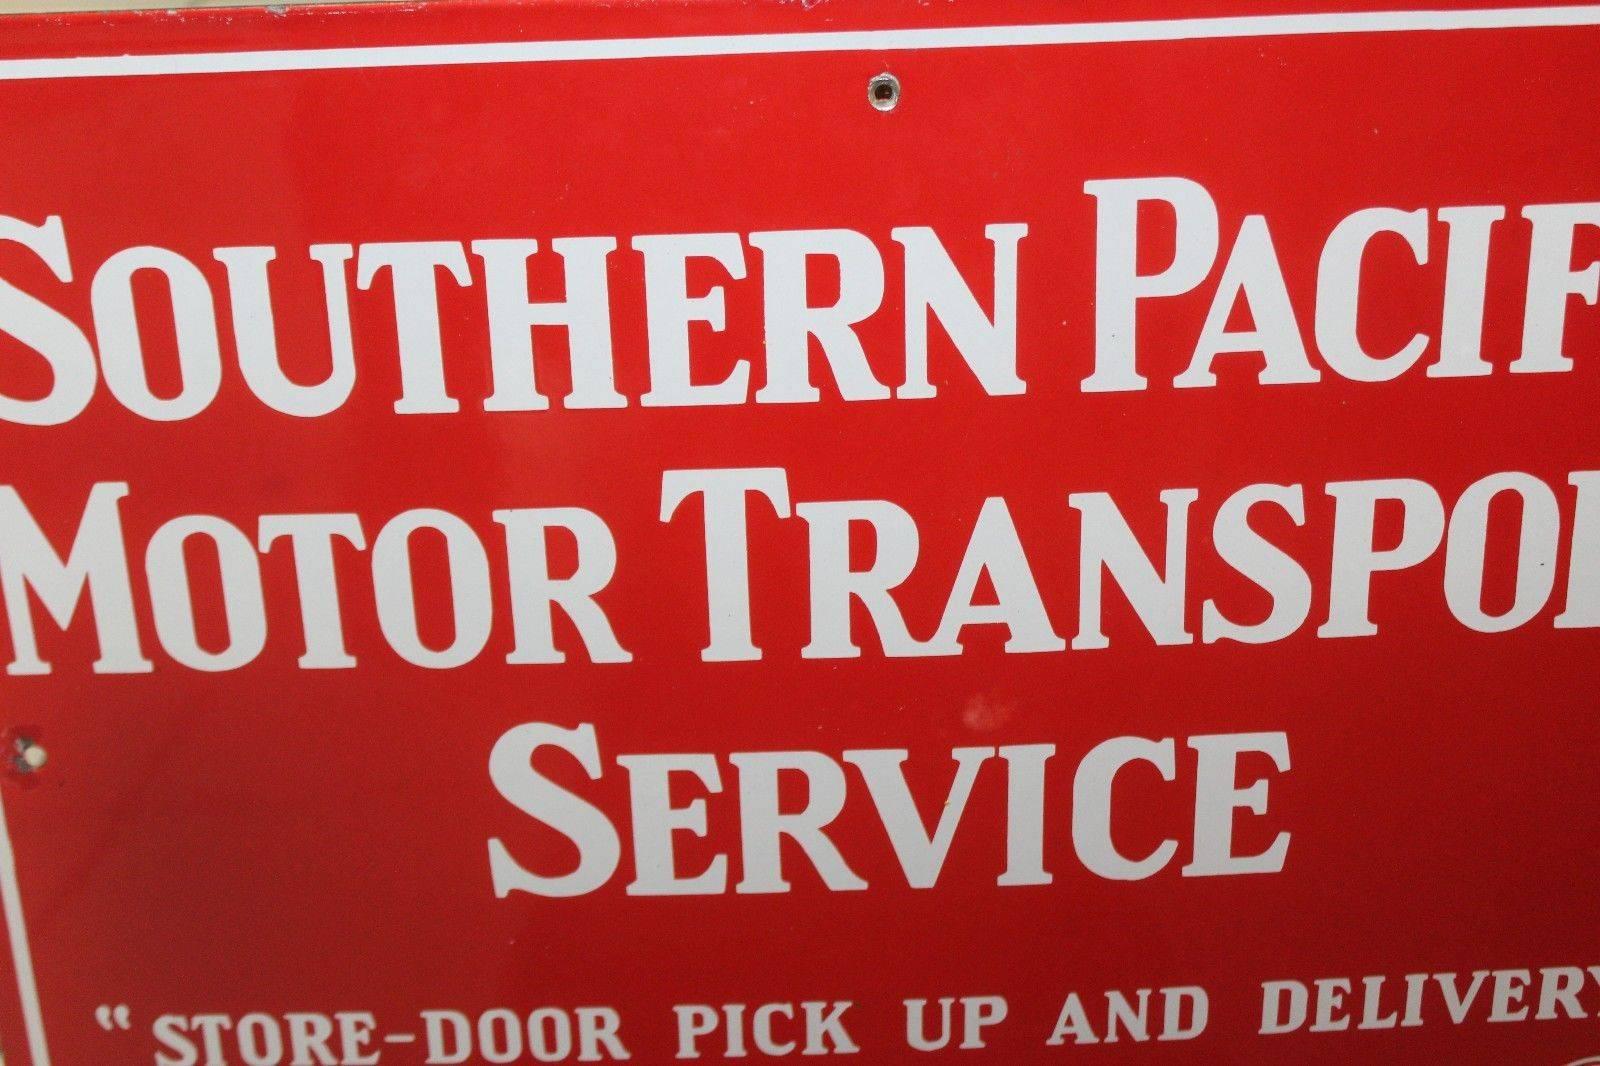 American Vintage 1940s Southern Pacific Lines Motor Transport Service Porcelain Sign For Sale